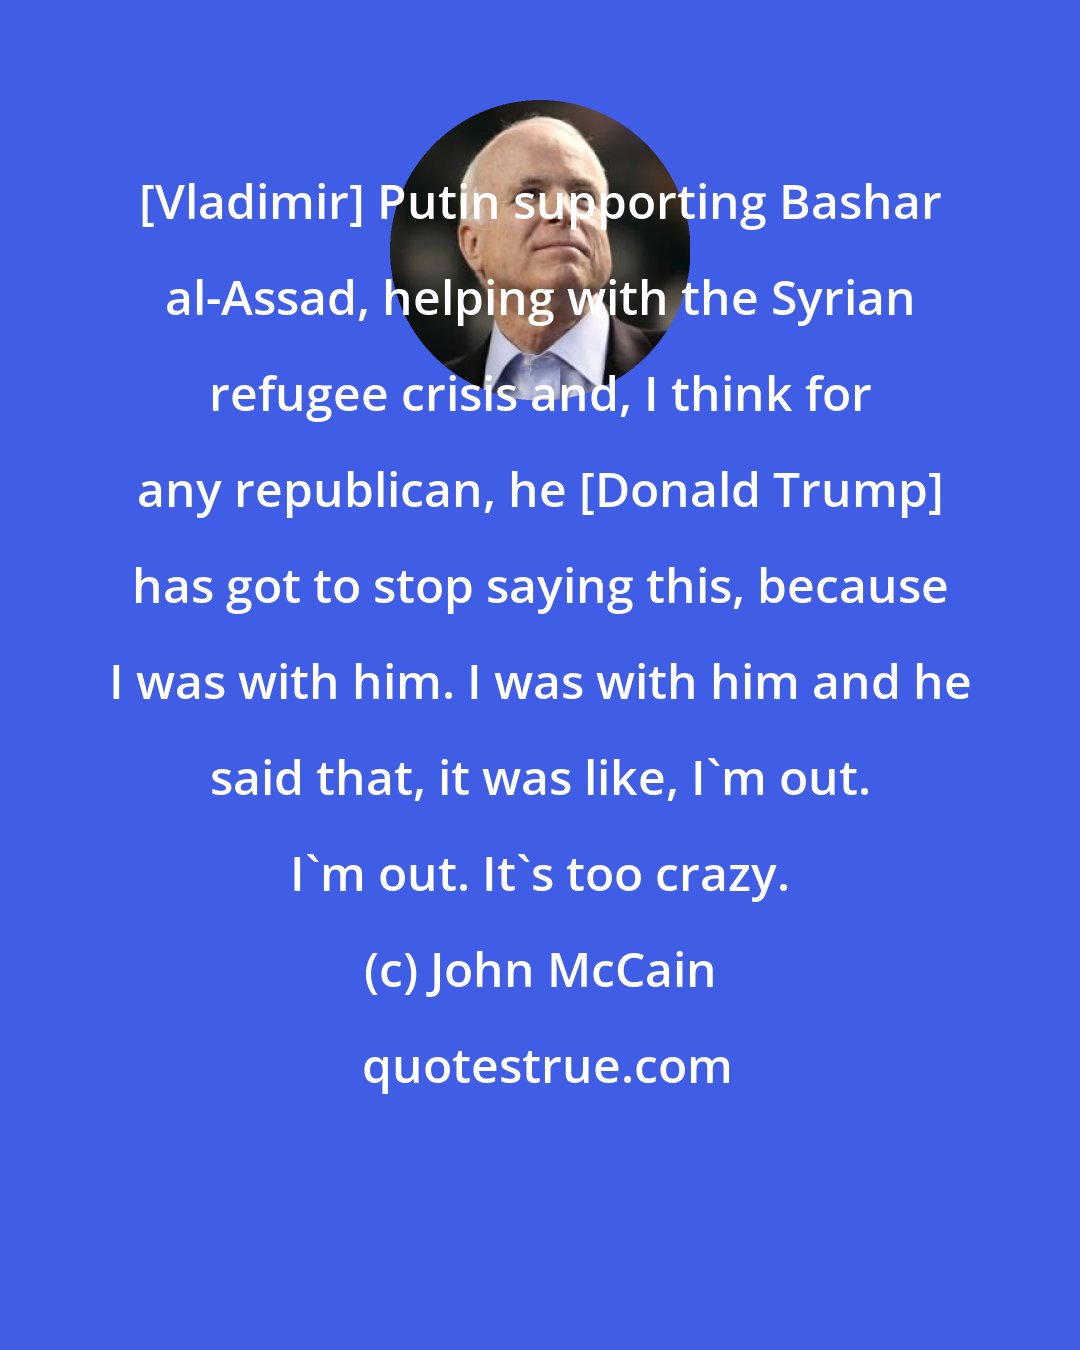 John McCain: [Vladimir] Putin supporting Bashar al-Assad, helping with the Syrian refugee crisis and, I think for any republican, he [Donald Trump] has got to stop saying this, because I was with him. I was with him and he said that, it was like, I'm out. I'm out. It's too crazy.